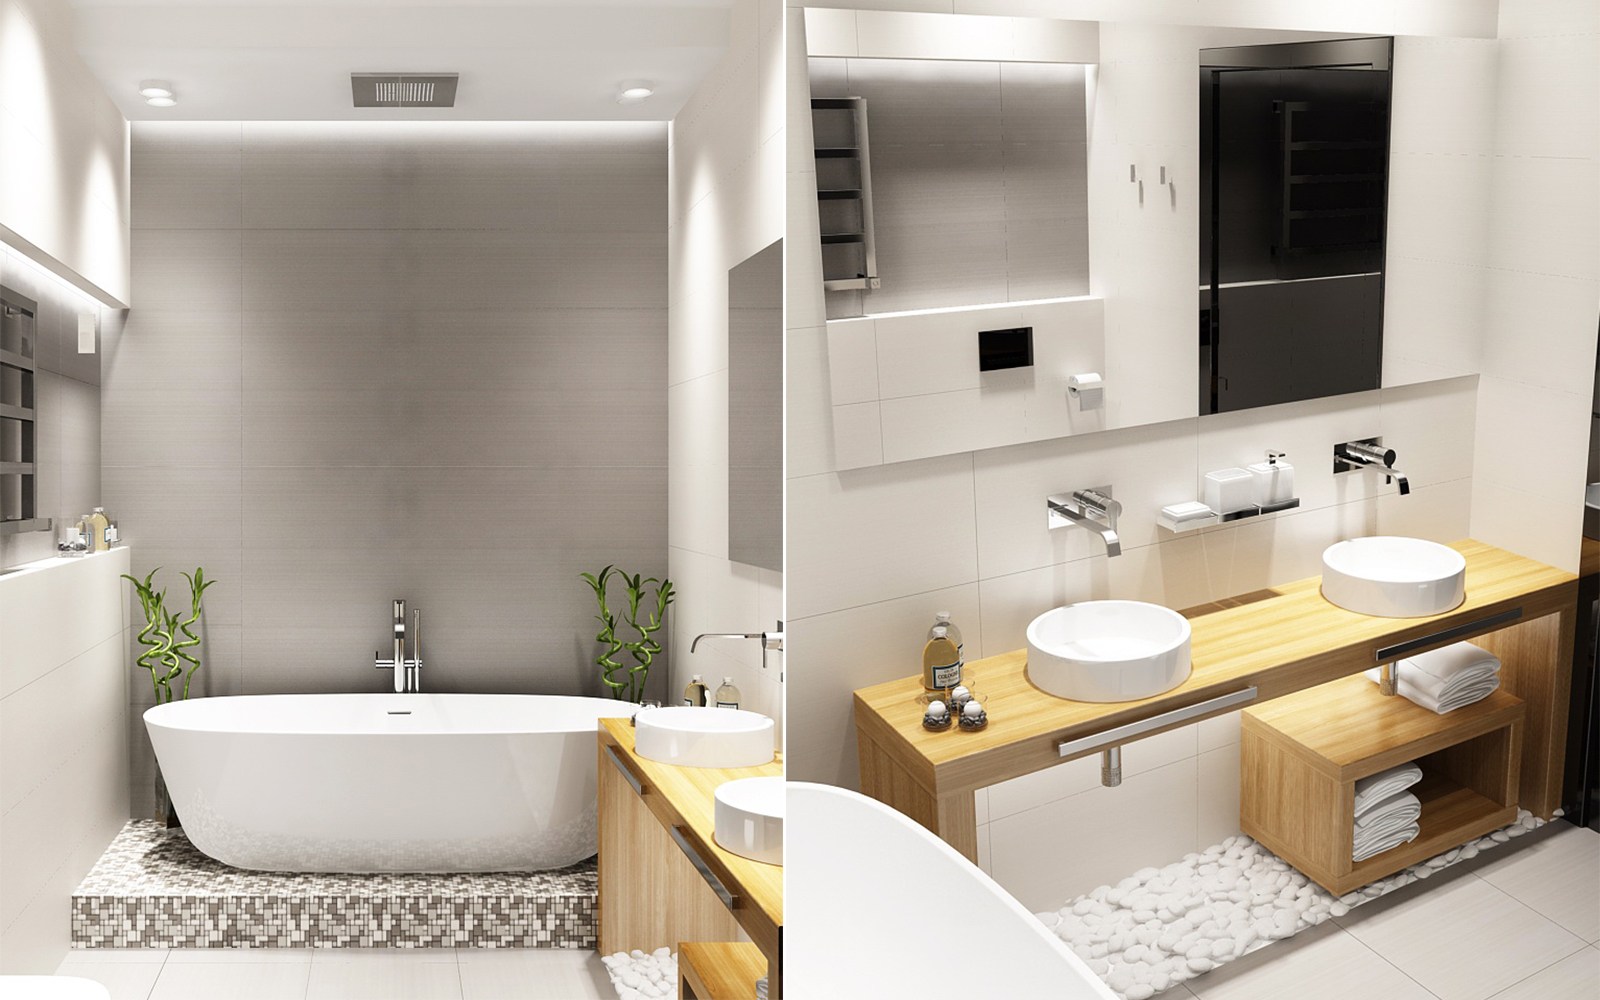 white bathroom design "width =" 1600 "height =" 1000 "srcset =" https://mileray.com/wp-content/uploads/2020/05/1588516074_317_Creative-Way-To-Decorate-White-Bathroom-Designs-Beautified-With-a.jpg 1600w, https: // myfashionos. com / wp-content / uploads / 2016/09 / Anton-Grishin-1-300x188.jpg 300w, https://mileray.com/wp-content/uploads/2016/09/Anton-Grishin-1-768x480.jpg 768w, https://mileray.com/wp-content/uploads/2016/09/Anton-Grishin-1-1024x640.jpg 1024w, https://mileray.com/wp-content/uploads/2016/09/Anton -Grishin-1-696x435.jpg 696w, https://mileray.com/wp-content/uploads/2016/09/Anton-Grishin-1-1068x668.jpg 1068w, https://mileray.com/wp-content /uploads/2016/09/Anton-Grishin-1-672x420.jpg 672w "sizes =" (maximum width: 1600px) 100vw, 1600px